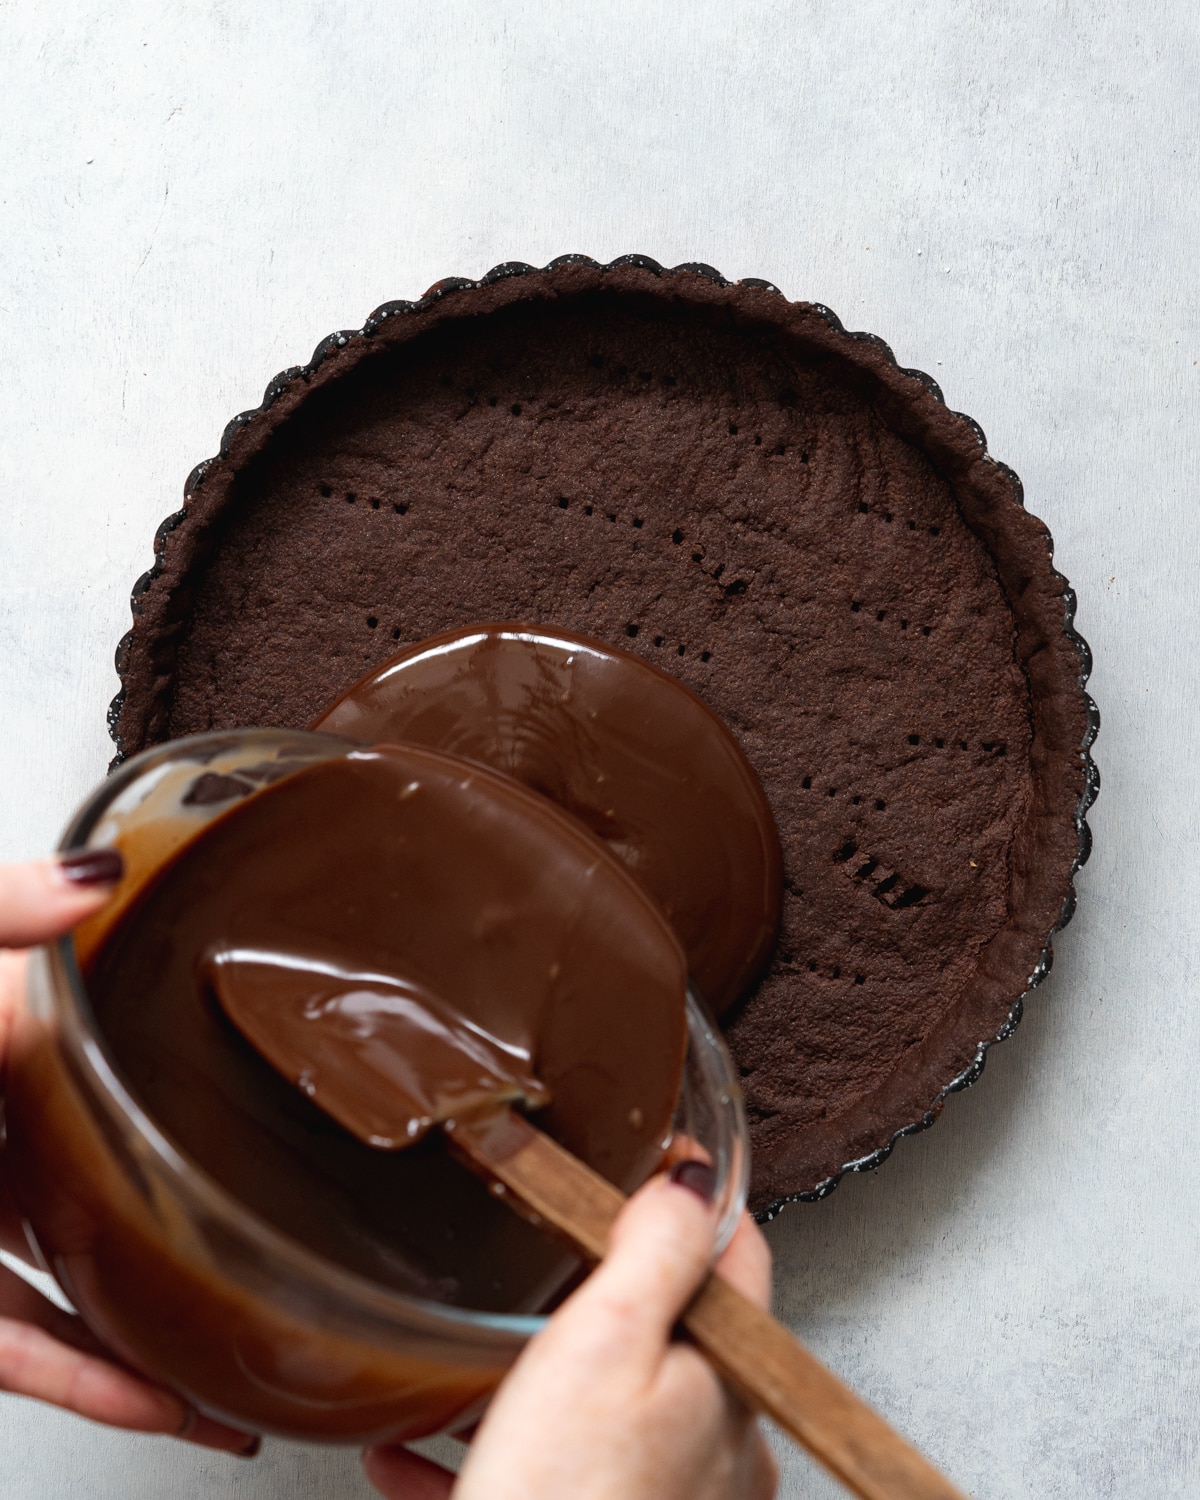 pouring chocolate ganache into a chocolate pastry shell.